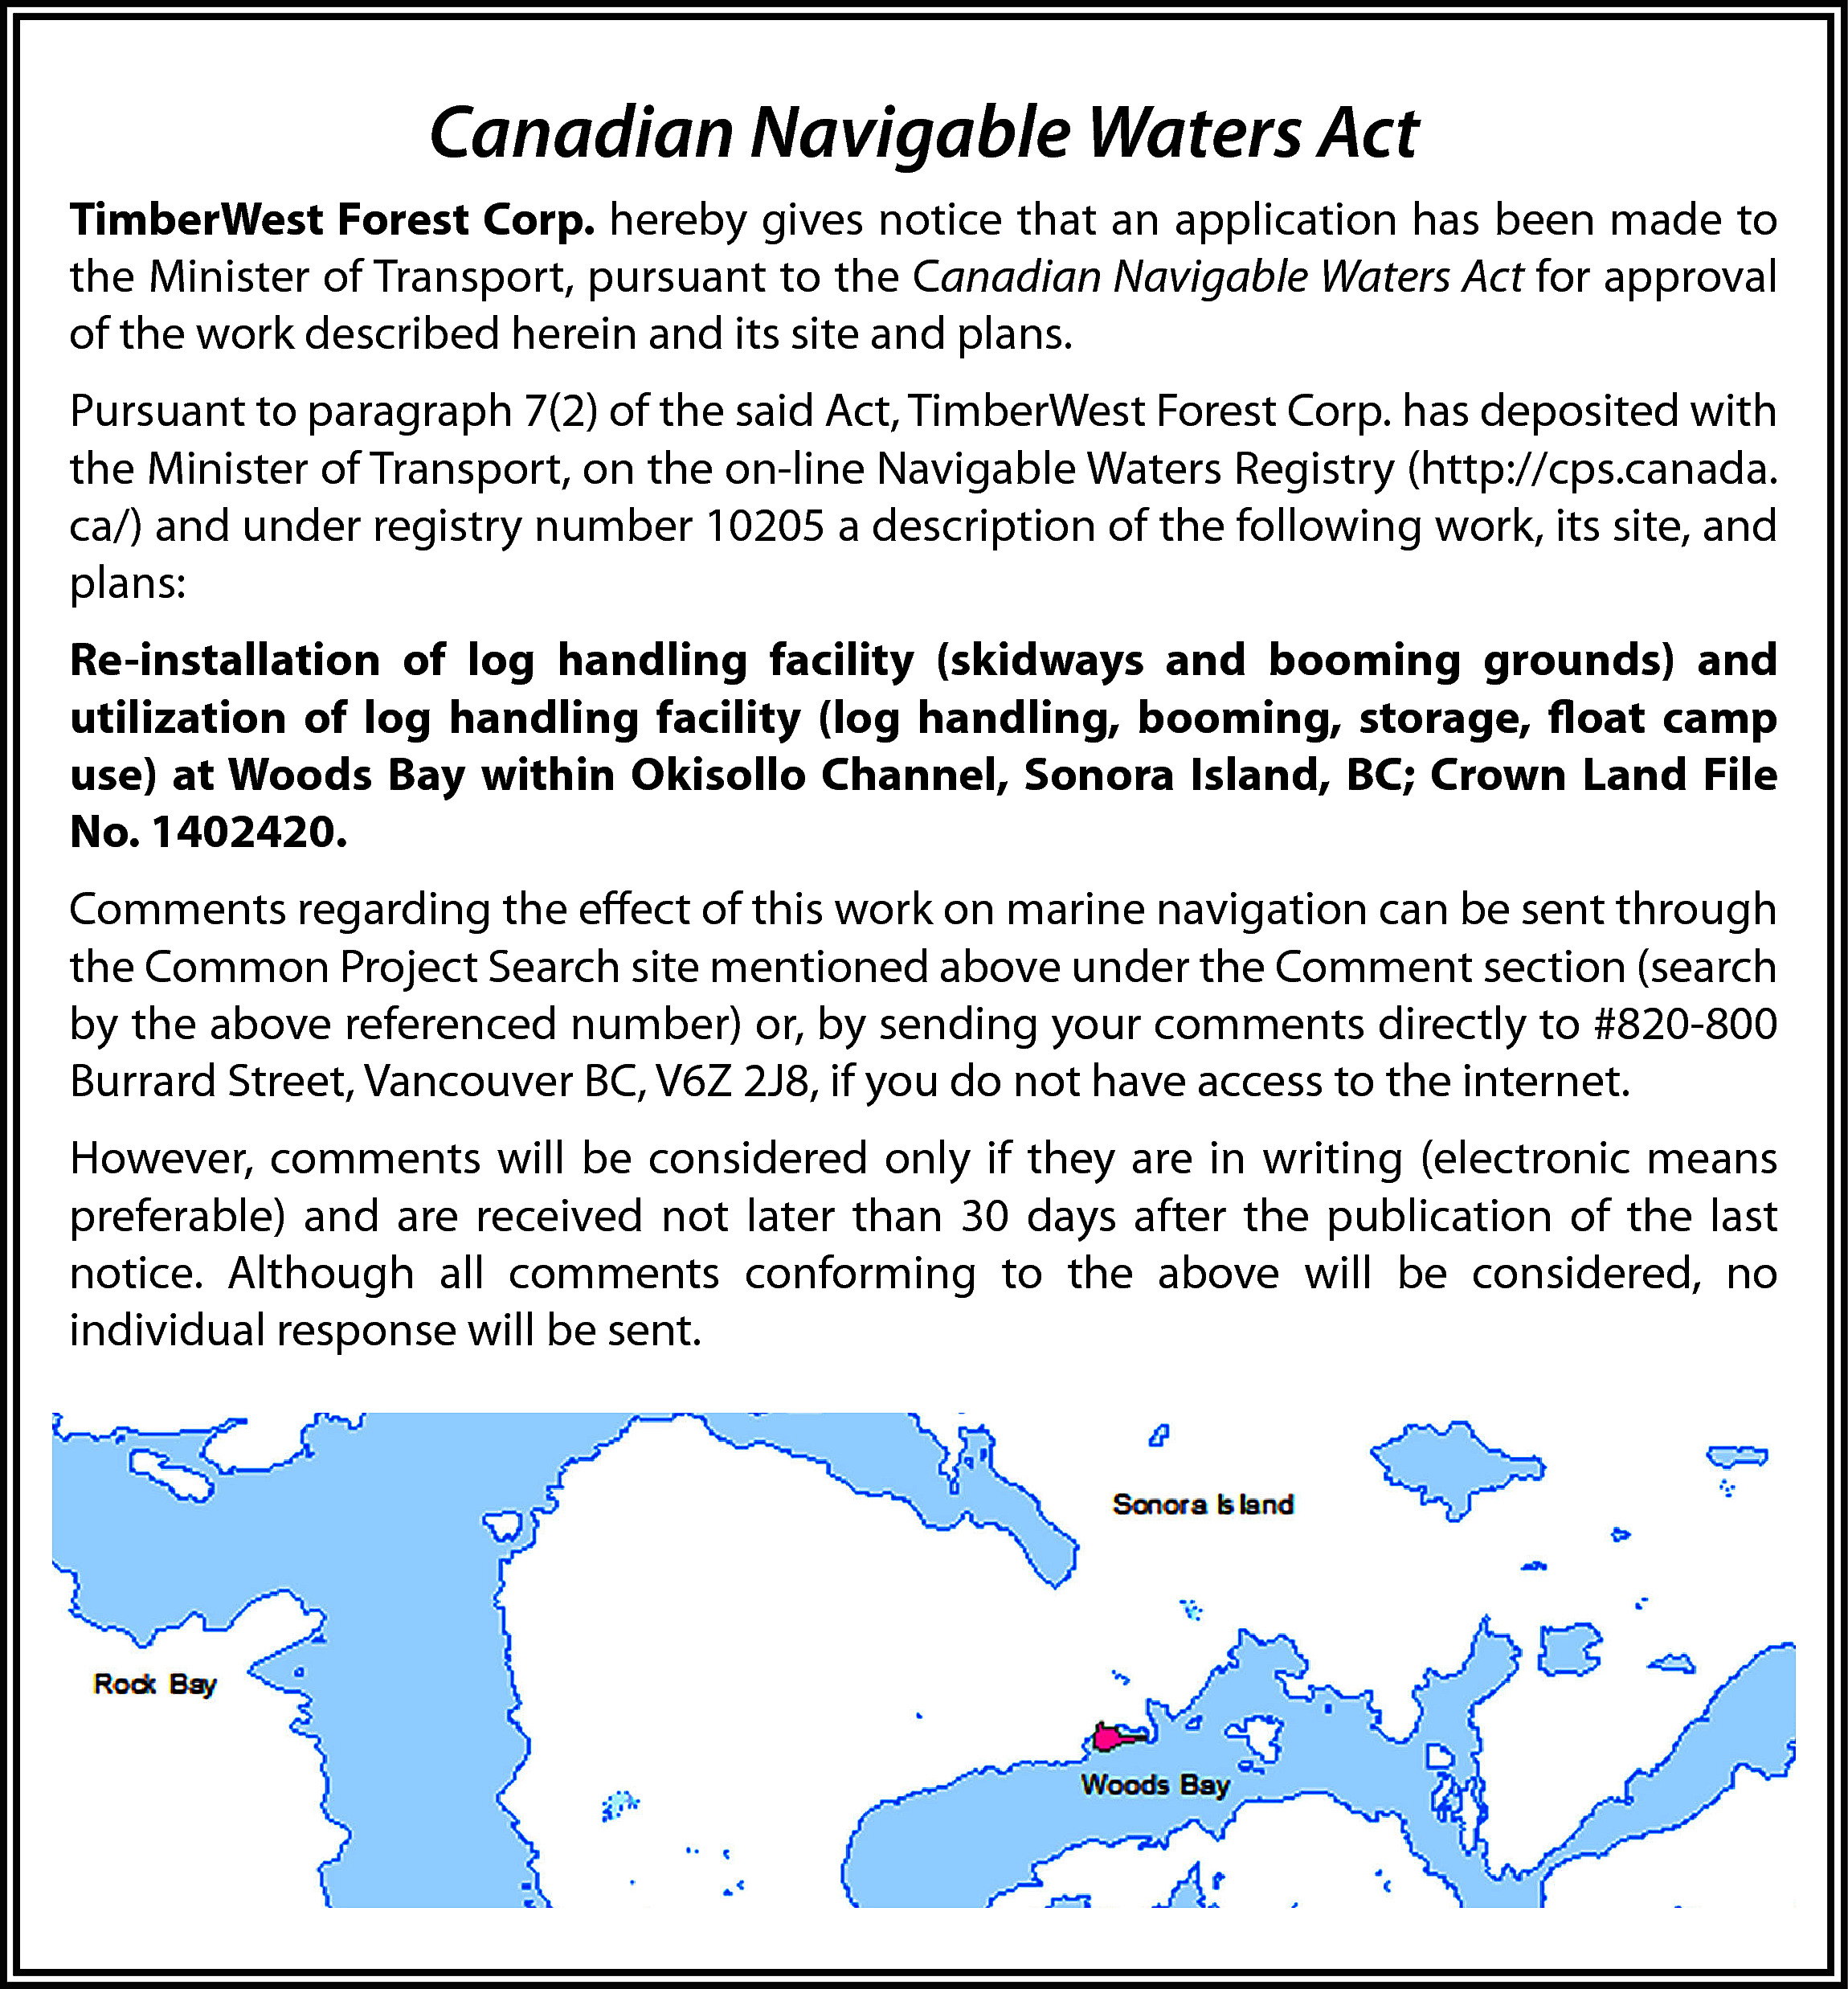 Canadian Navigable Waters Act <br>TimberWest  Canadian Navigable Waters Act  TimberWest Forest Corp. hereby gives notice that an application has been made to  the Minister of Transport, pursuant to the Canadian Navigable Waters Act for approval  of the work described herein and its site and plans.  Pursuant to paragraph 7(2) of the said Act, TimberWest Forest Corp. has deposited with  the Minister of Transport, on the on-line Navigable Waters Registry (http://cps.canada.  ca/) and under registry number 10205 a description of the following work, its site, and  plans:  Re-installation of log handling facility (skidways and booming grounds) and  utilization of log handling facility (log handling, booming, storage, float camp  use) at Woods Bay within Okisollo Channel, Sonora Island, BC; Crown Land File  No. 1402420.  Comments regarding the effect of this work on marine navigation can be sent through  the Common Project Search site mentioned above under the Comment section (search  by the above referenced number) or, by sending your comments directly to #820-800  Burrard Street, Vancouver BC, V6Z 2J8, if you do not have access to the internet.  However, comments will be considered only if they are in writing (electronic means  preferable) and are received not later than 30 days after the publication of the last  notice. Although all comments conforming to the above will be considered, no  individual response will be sent.    